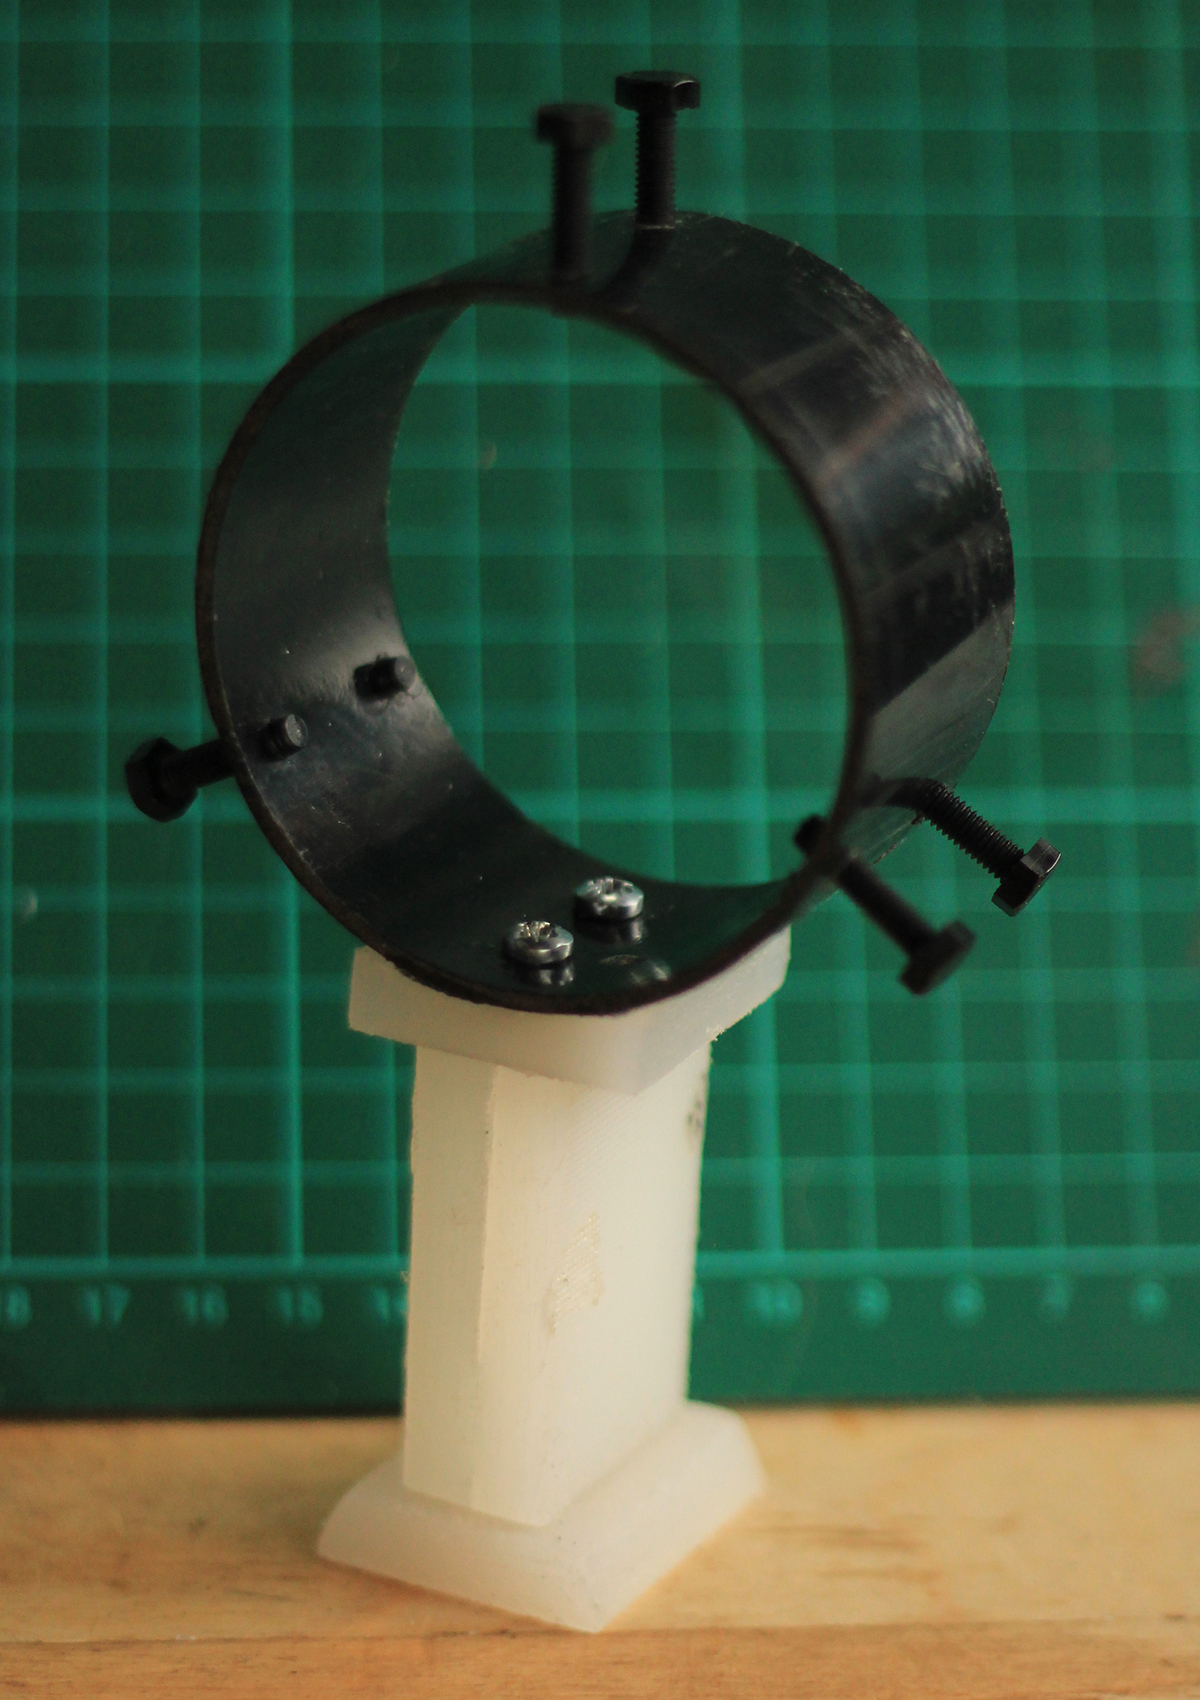 Build a guidescope using an old camera lens